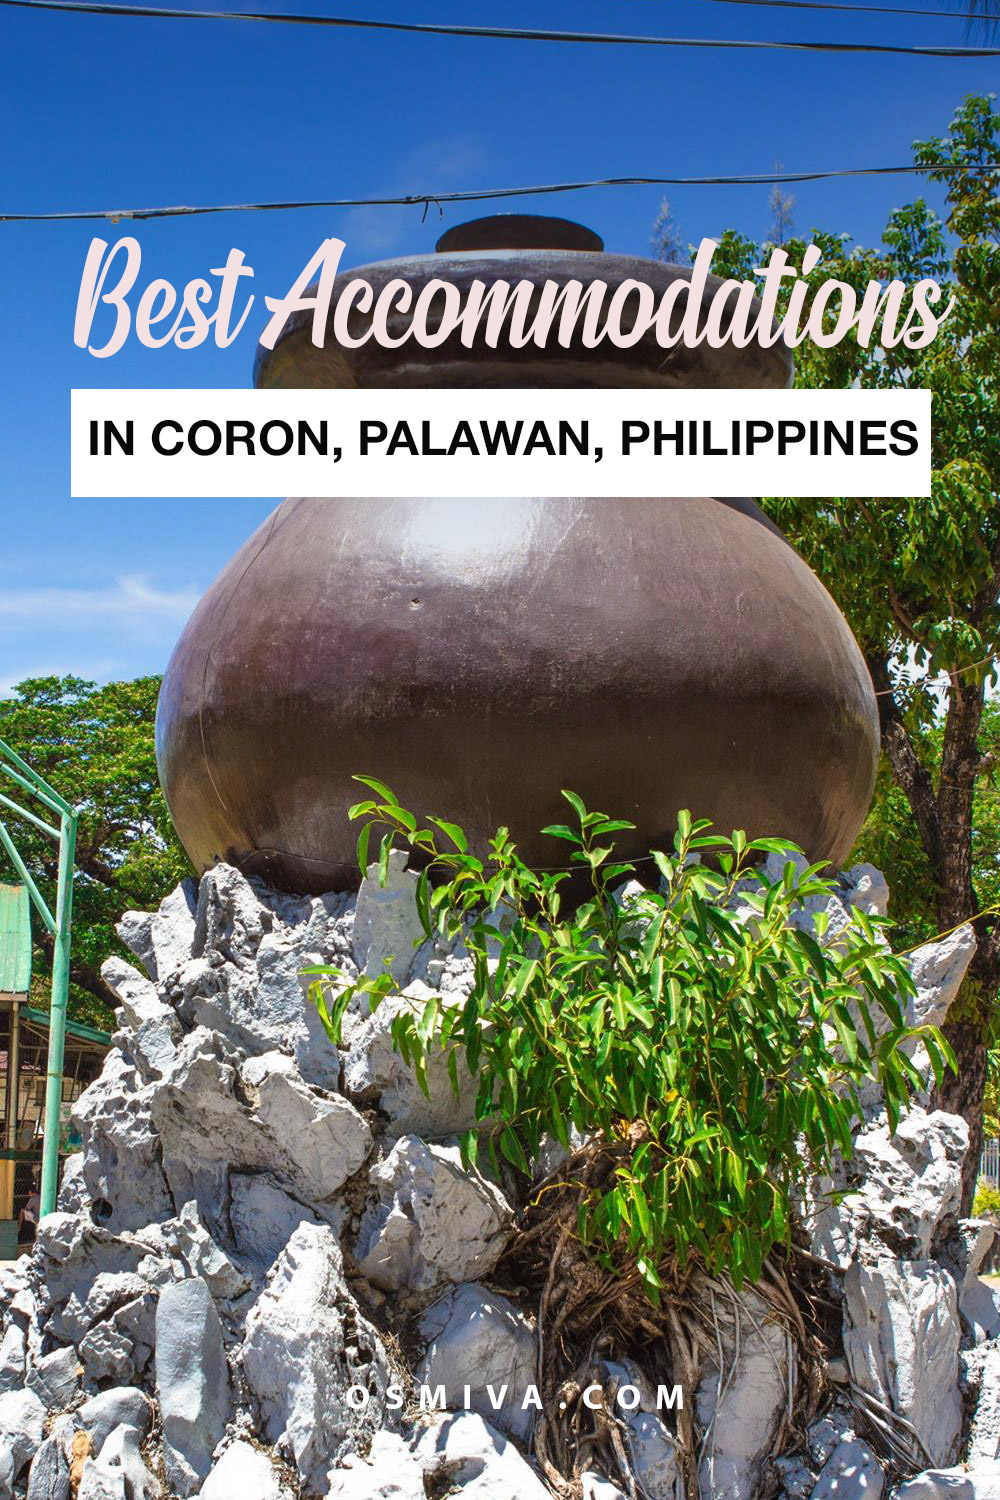 Best Hotels and Resorts in Coron, Palawan